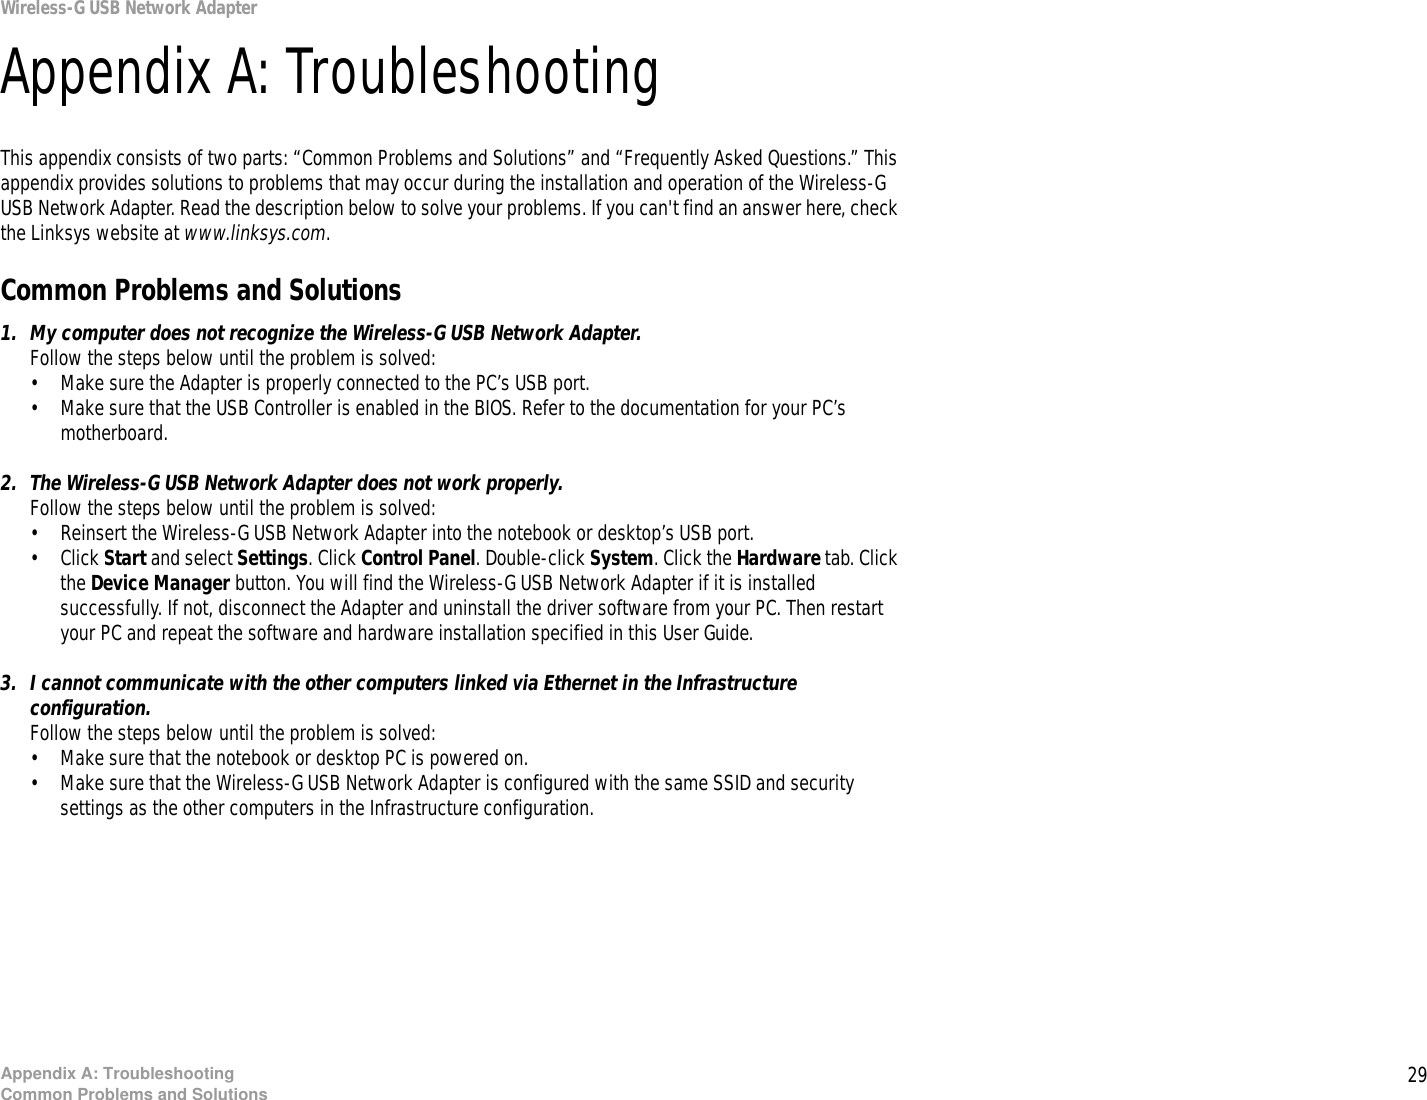 29Appendix A: TroubleshootingCommon Problems and SolutionsWireless-G USB Network AdapterAppendix A: TroubleshootingThis appendix consists of two parts: “Common Problems and Solutions” and “Frequently Asked Questions.” This appendix provides solutions to problems that may occur during the installation and operation of the Wireless-G USB Network Adapter. Read the description below to solve your problems. If you can&apos;t find an answer here, check the Linksys website at www.linksys.com.Common Problems and Solutions1. My computer does not recognize the Wireless-G USB Network Adapter.Follow the steps below until the problem is solved:• Make sure the Adapter is properly connected to the PC’s USB port.• Make sure that the USB Controller is enabled in the BIOS. Refer to the documentation for your PC’s motherboard.2. The Wireless-G USB Network Adapter does not work properly.Follow the steps below until the problem is solved:• Reinsert the Wireless-G USB Network Adapter into the notebook or desktop’s USB port. • Click Start and select Settings. Click Control Panel. Double-click System. Click the Hardware tab. Click the Device Manager button. You will find the Wireless-G USB Network Adapter if it is installed successfully. If not, disconnect the Adapter and uninstall the driver software from your PC. Then restart your PC and repeat the software and hardware installation specified in this User Guide.3. I cannot communicate with the other computers linked via Ethernet in the Infrastructure configuration.Follow the steps below until the problem is solved:• Make sure that the notebook or desktop PC is powered on.• Make sure that the Wireless-G USB Network Adapter is configured with the same SSID and security settings as the other computers in the Infrastructure configuration.